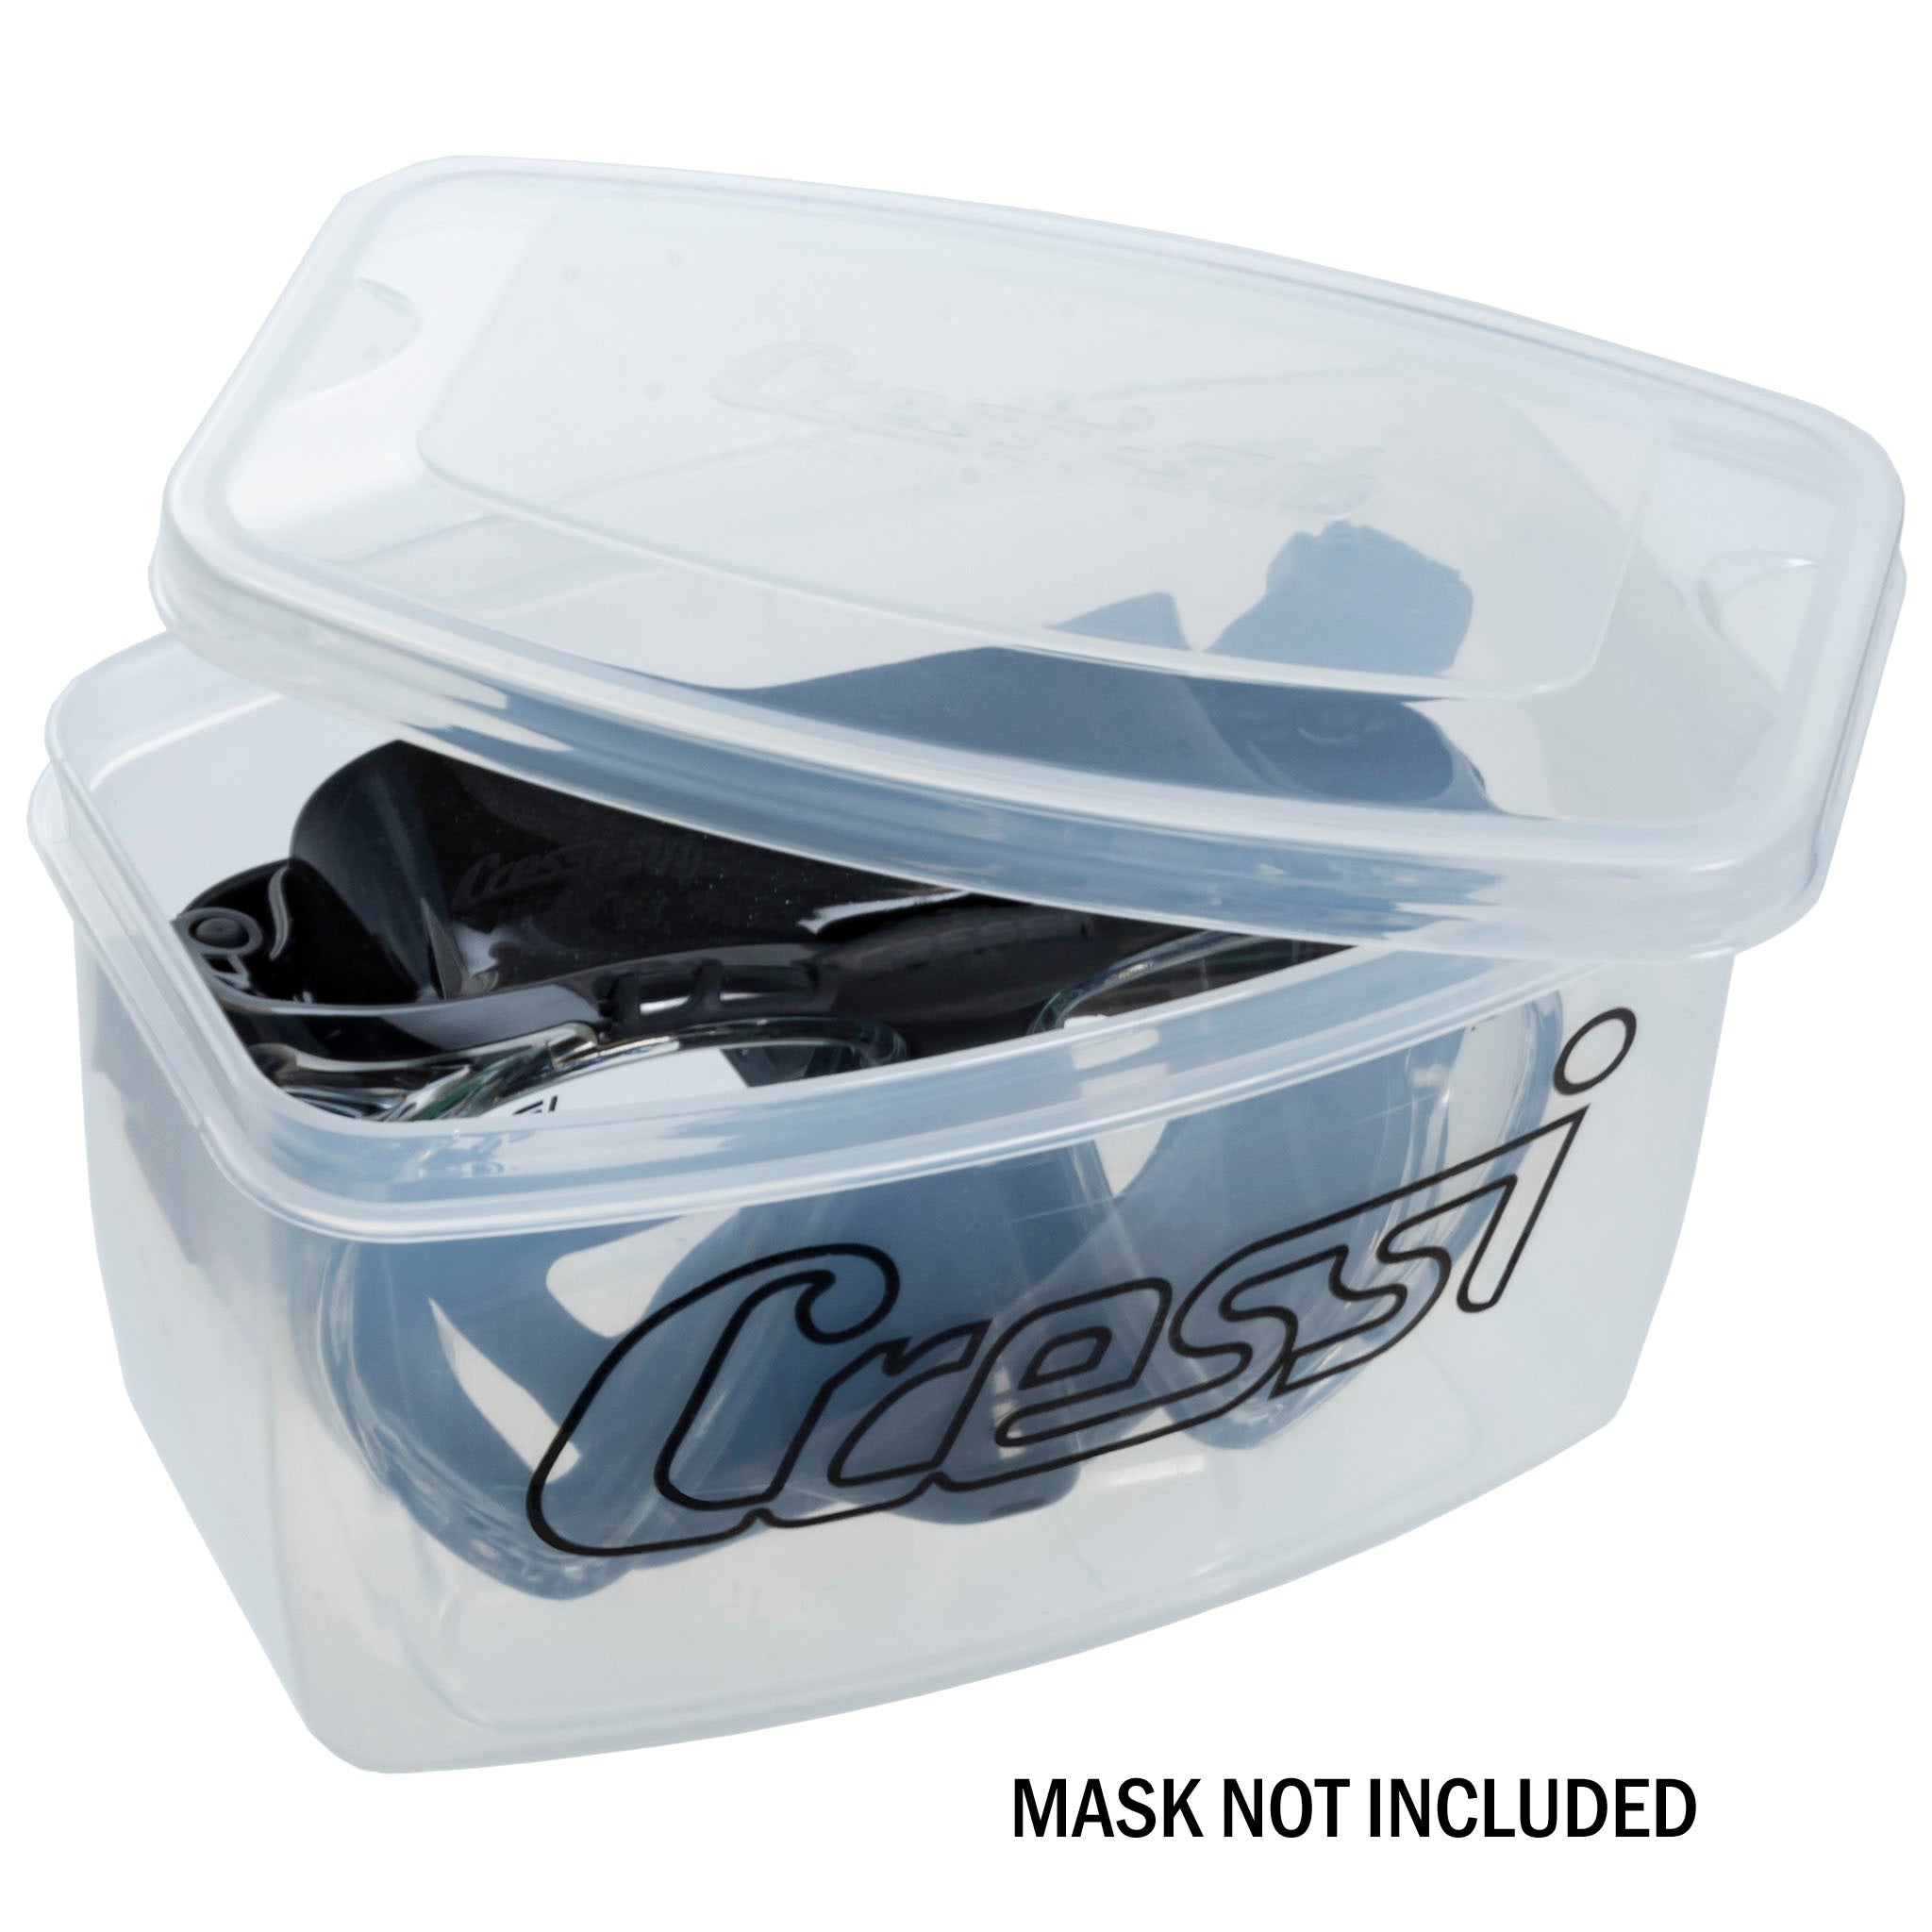 Cressi Dive Mask Box Large showing mask, not included